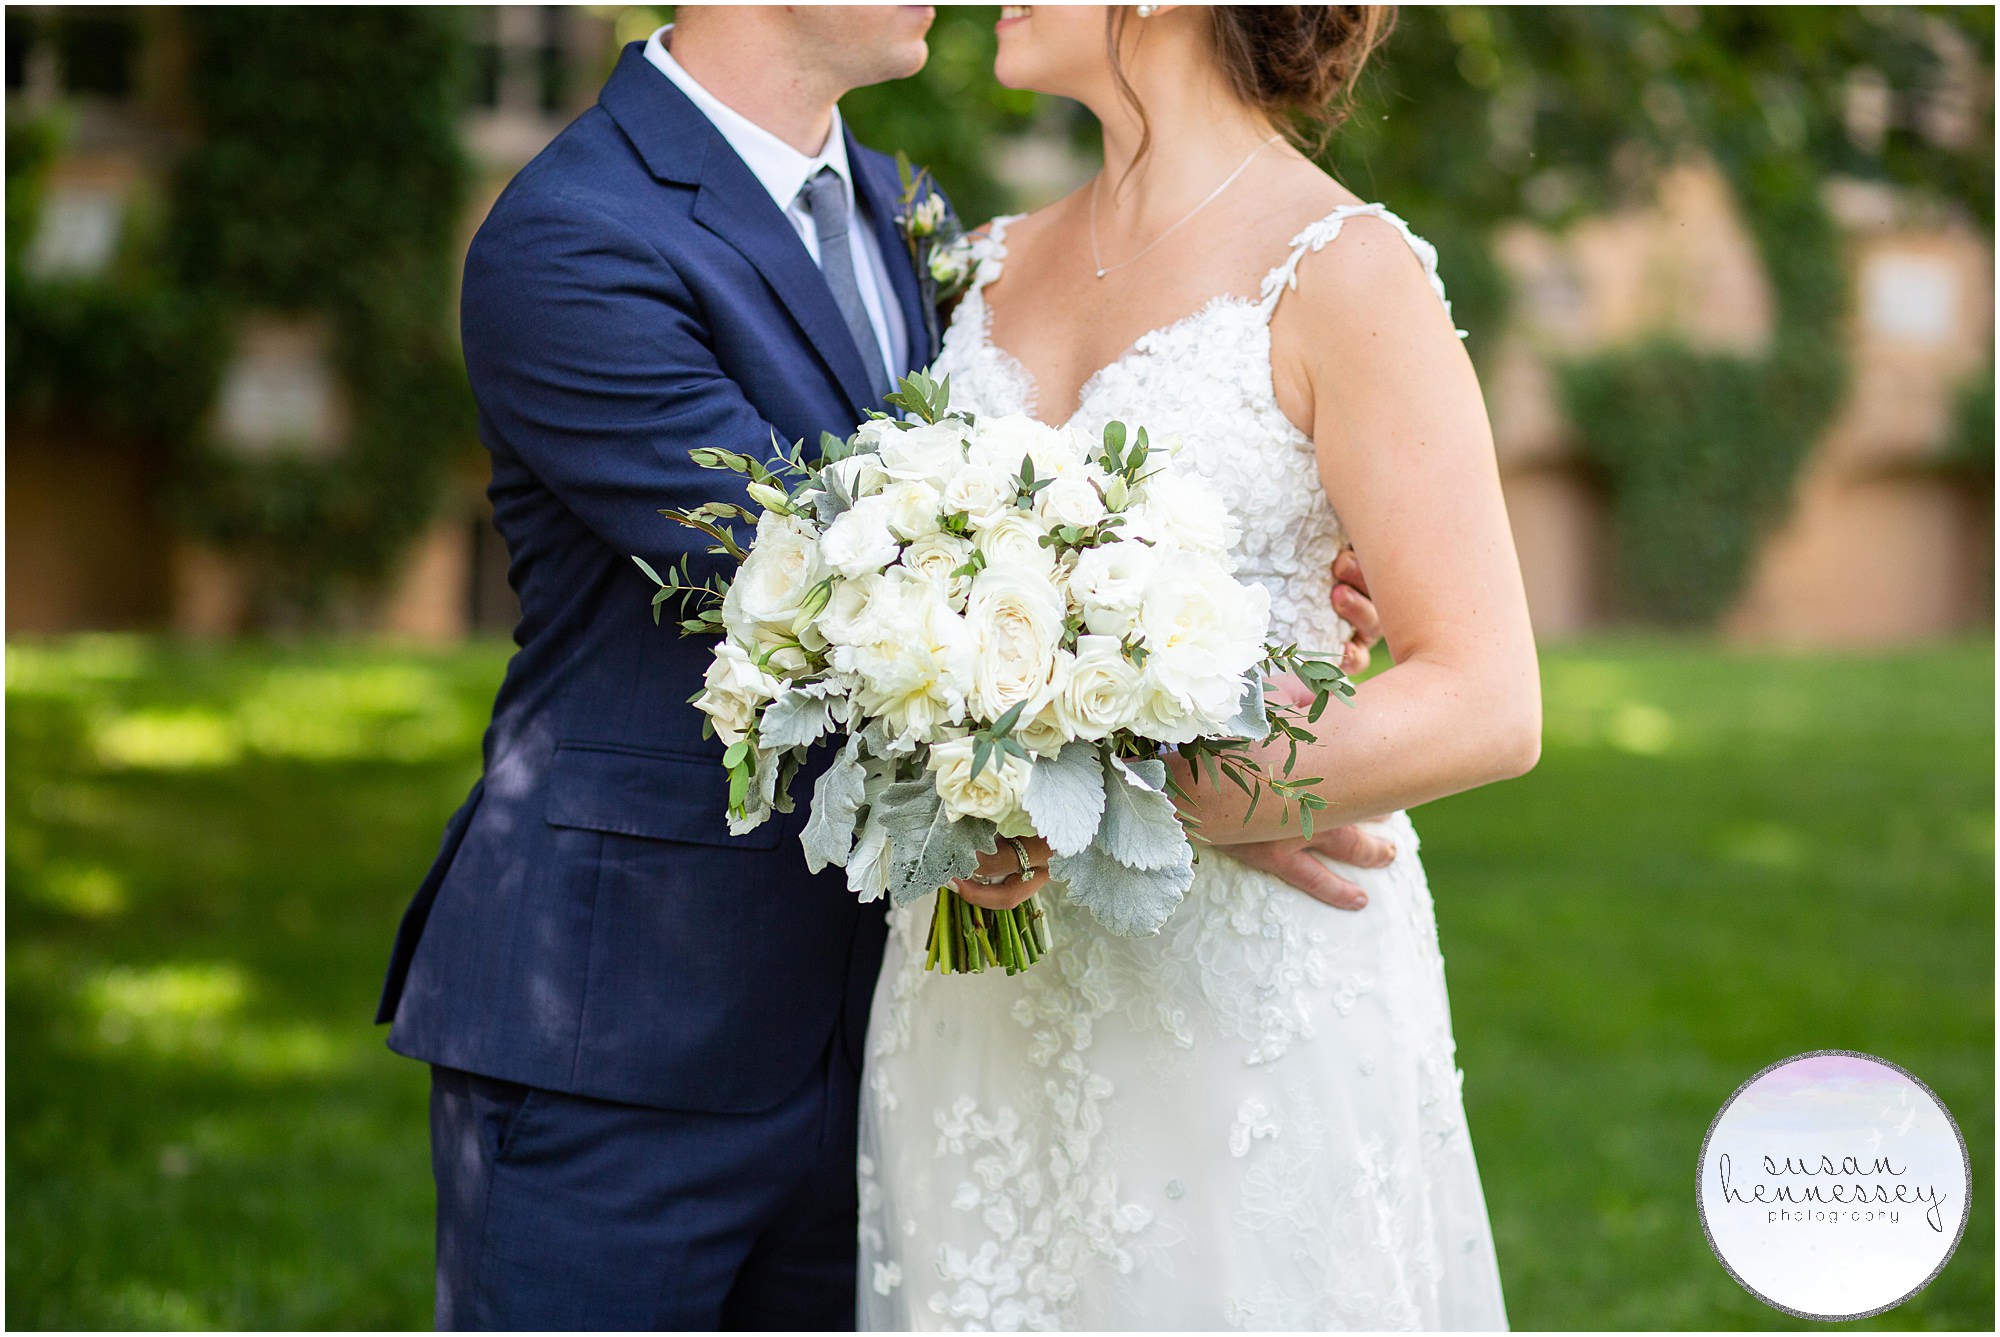 A bridal bouquet filled with white flowers.